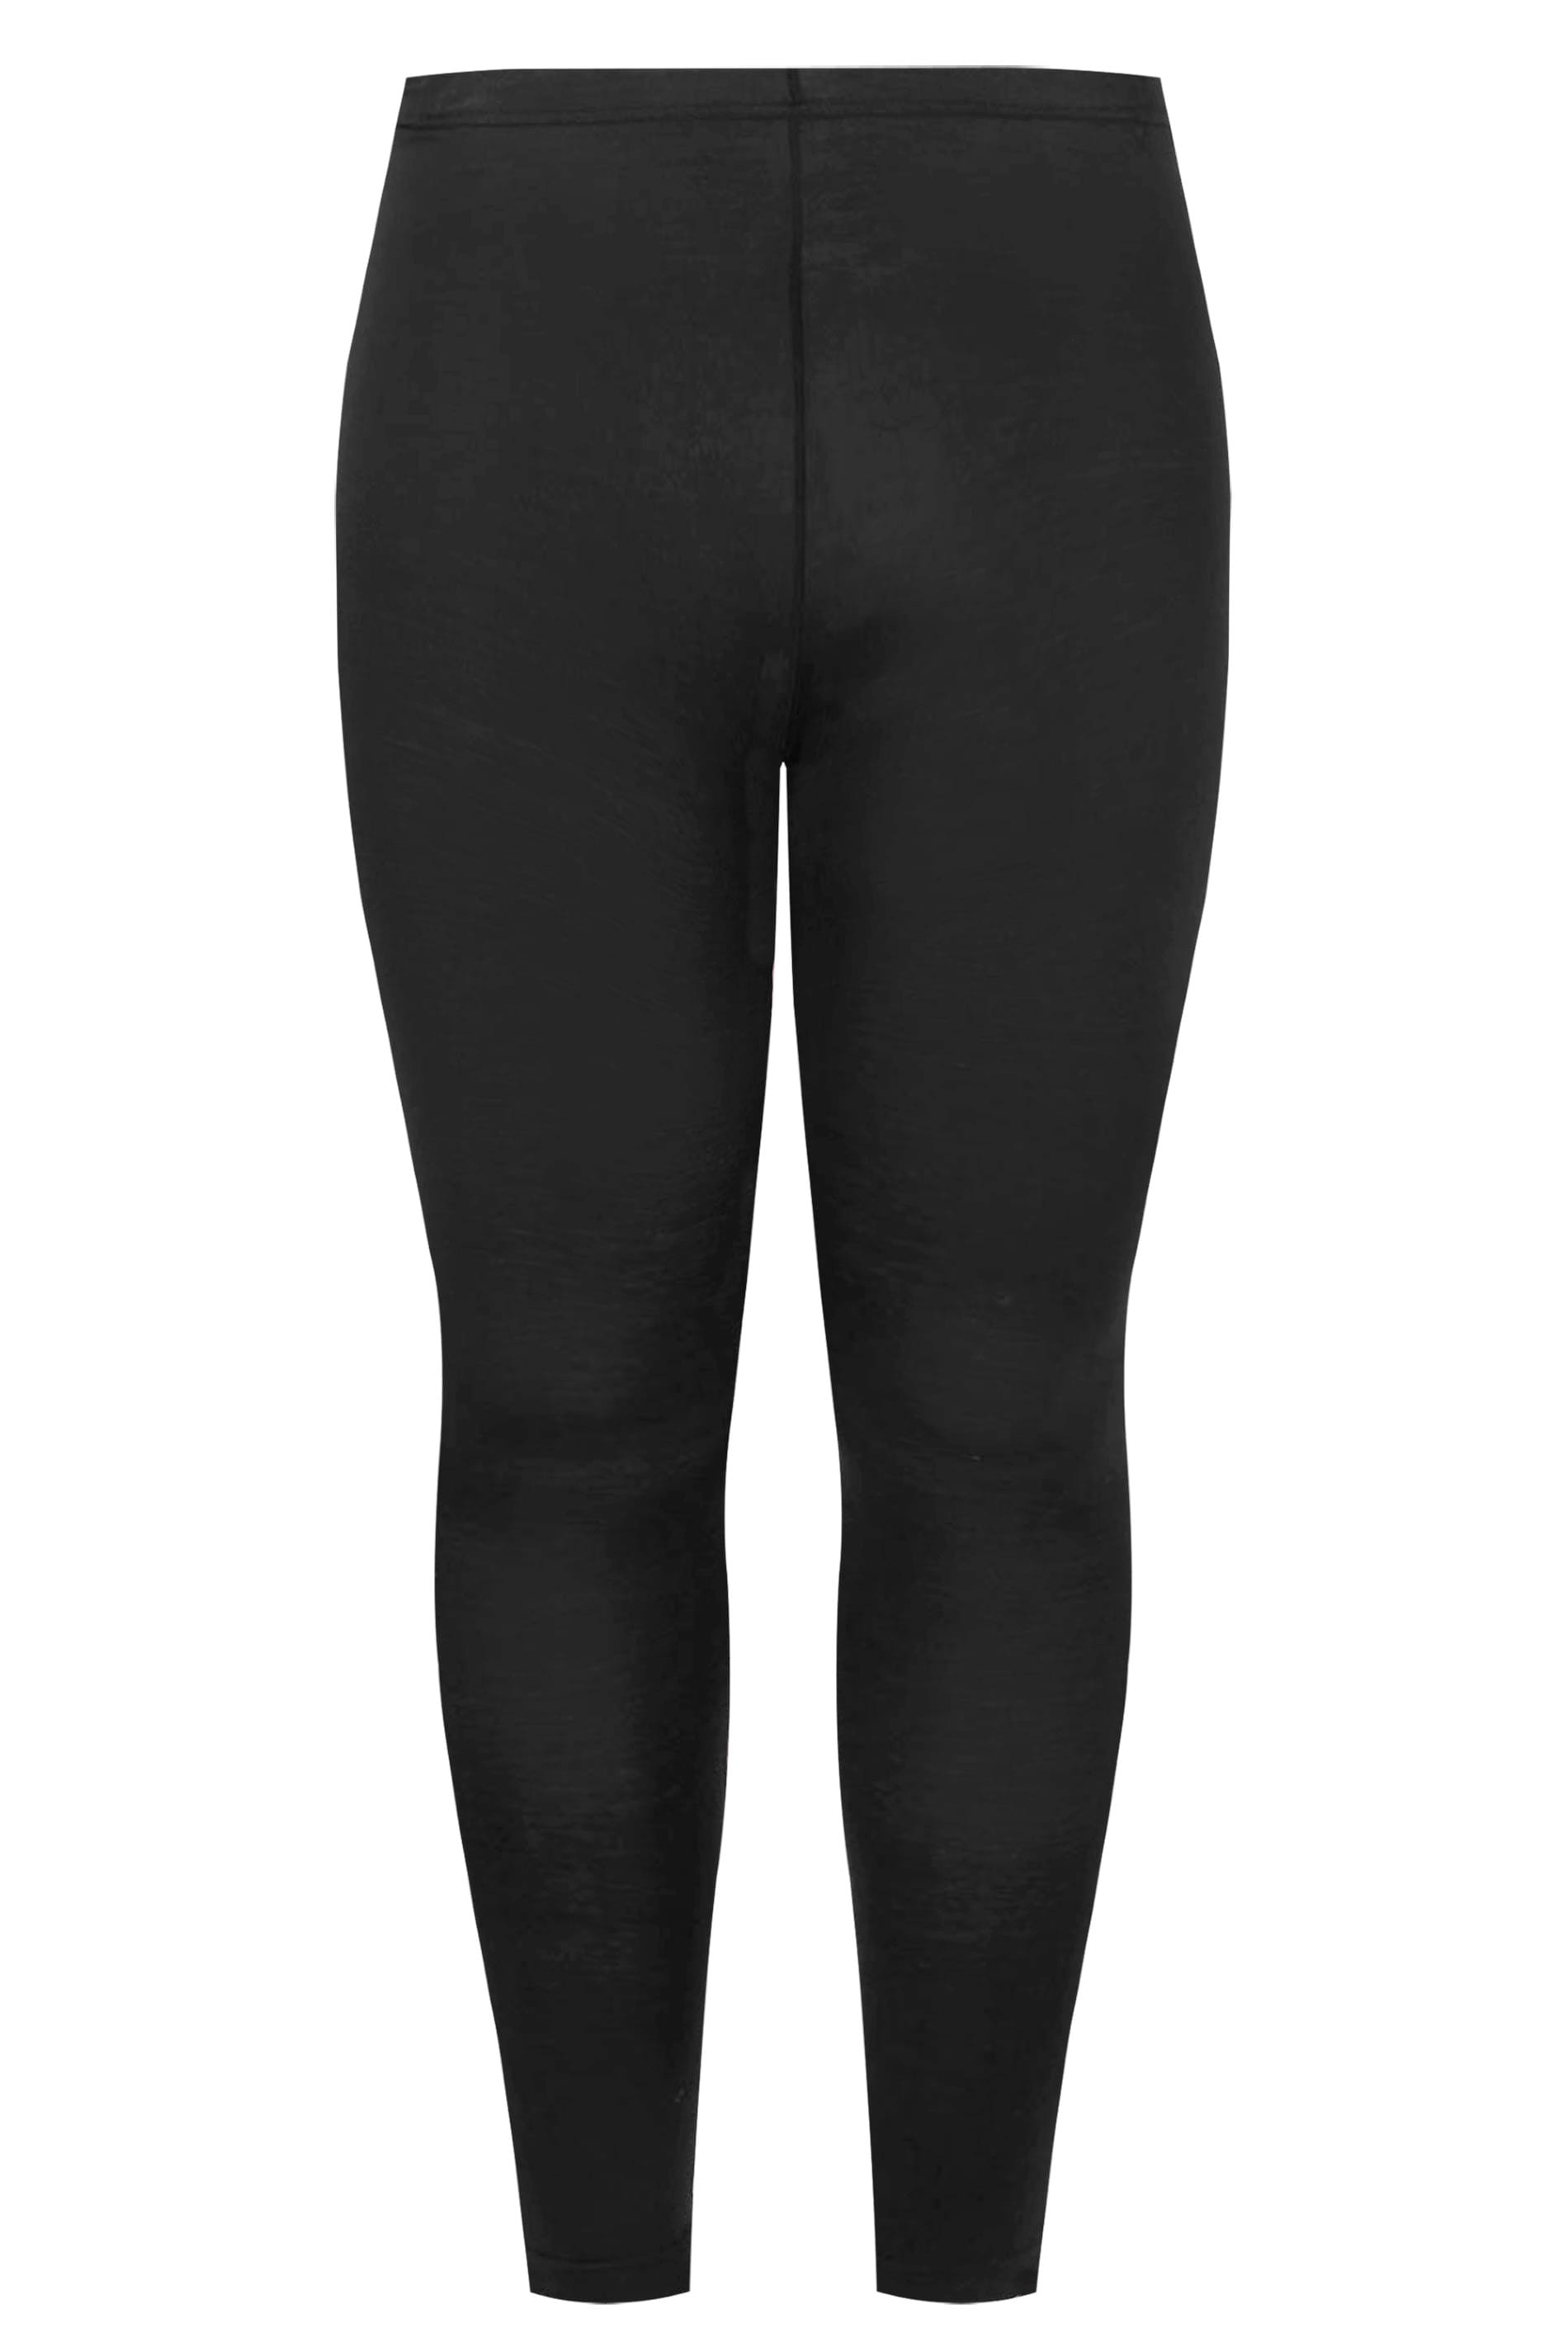 | Schwarz - Yours Touch Clothing Leggings Soft